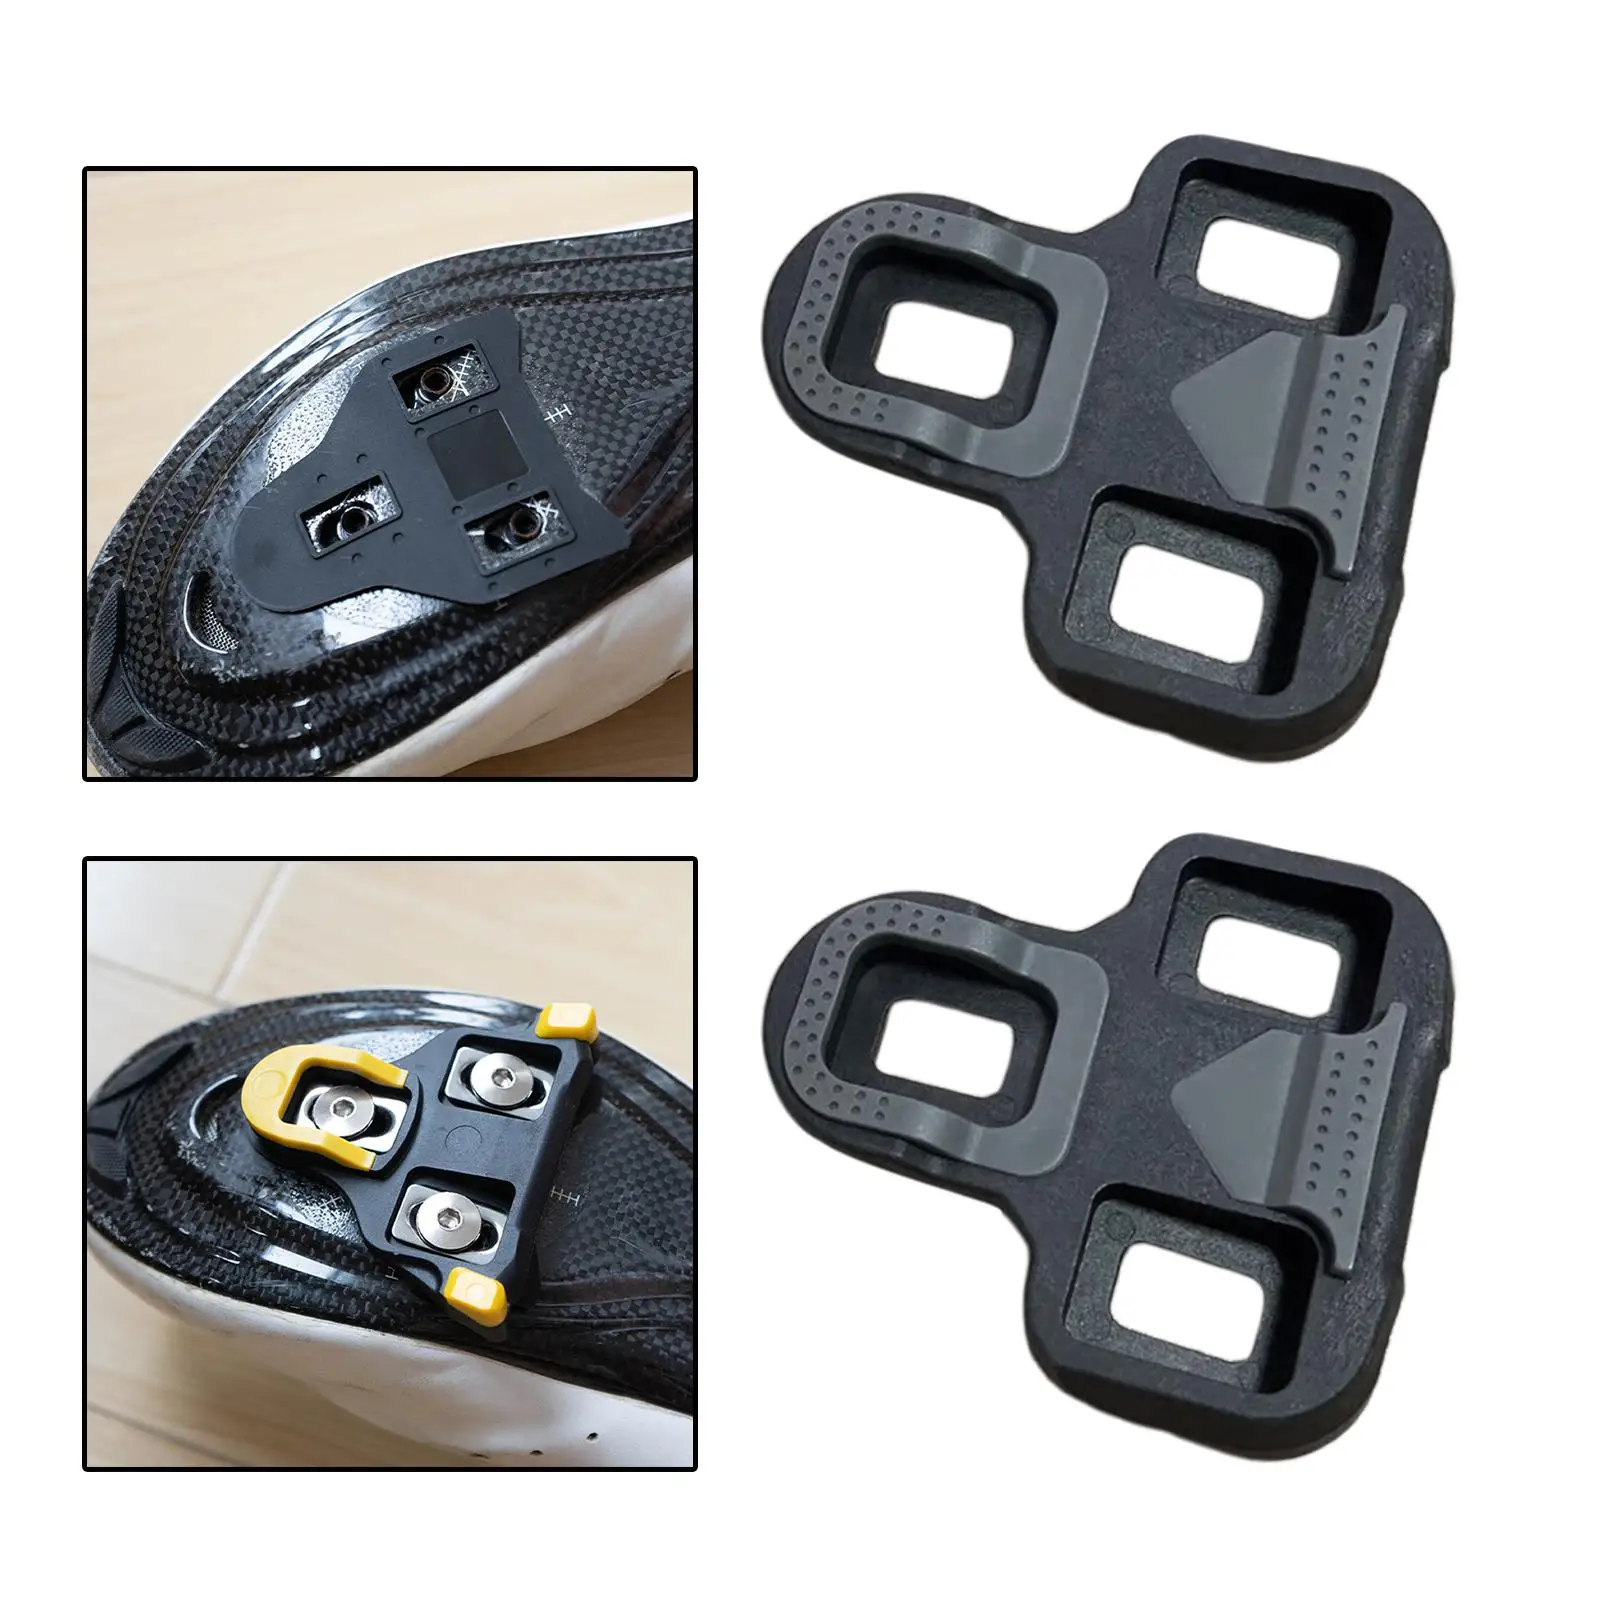 Road Bicycle Pedals Durable Universal Practical Bicycle Cleats for Cycling Cleat Set